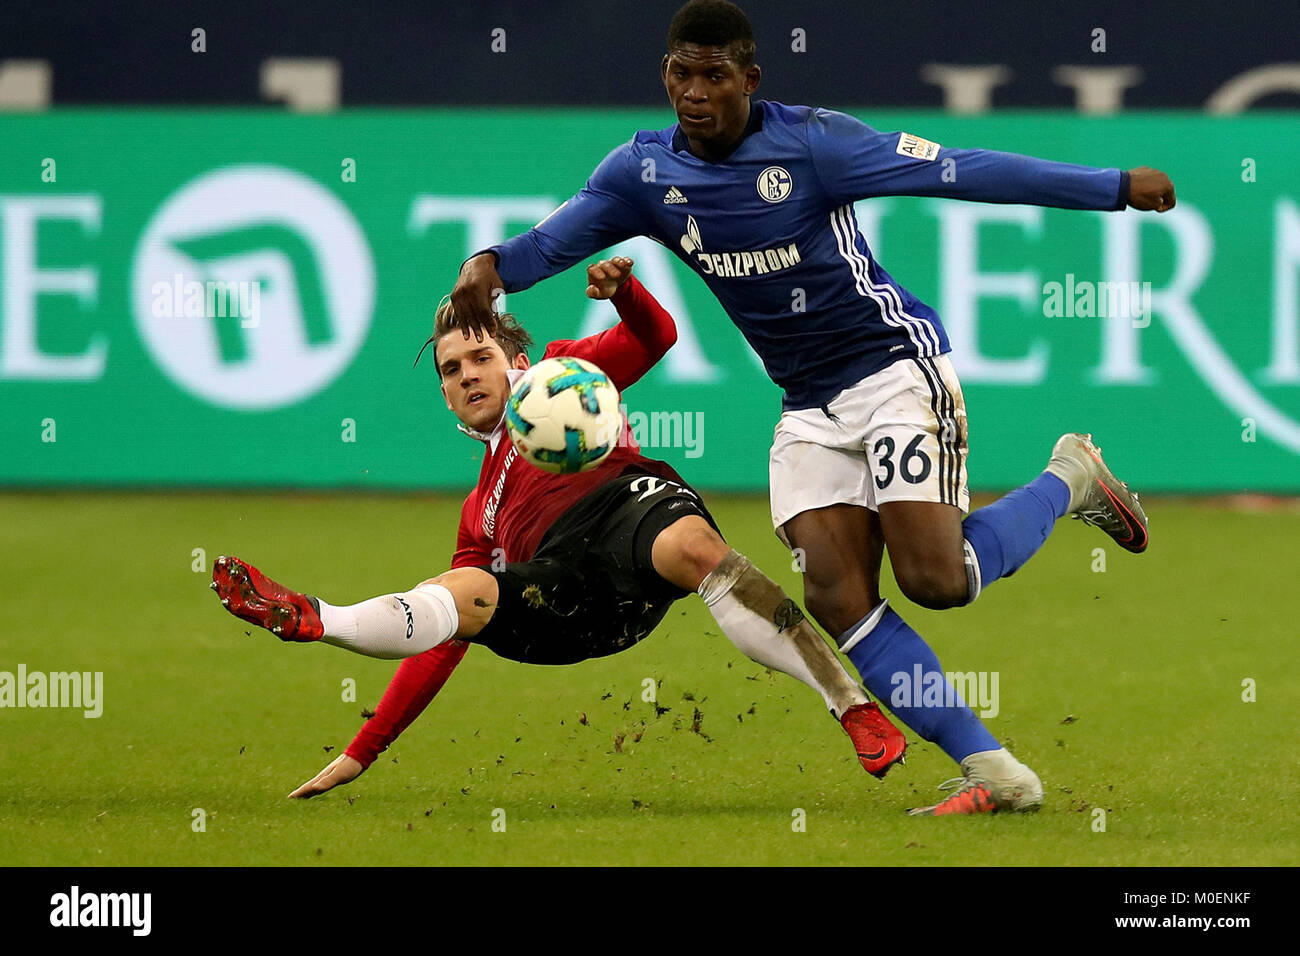 Gelsenkirchen, Germany. 21st Jan, 2018. Oliver Sorg (L) of Hannover and Breel Embolo of Schalke battle for the ball during the Bundesliga match between FC Schalke 04 and Hannover 96 at Veltins-Arena in Gelsenkirchen, Germany, Jan. 21, 2018. Credit: Joachim Bywaletz/Xinhua/Alamy Live News Stock Photo